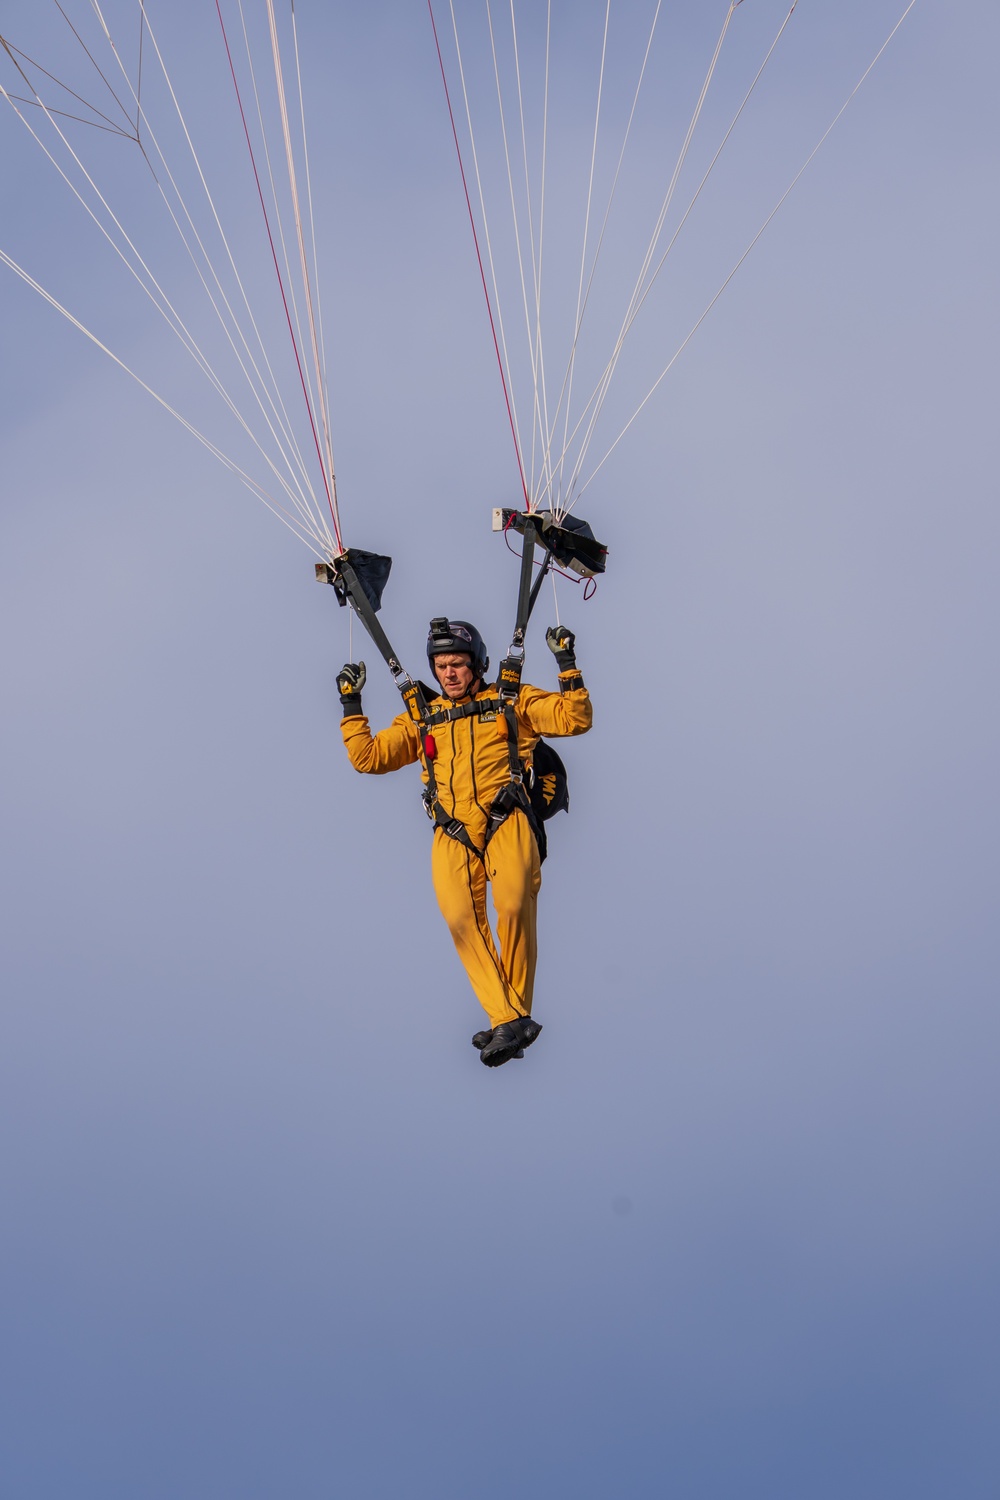 U.S. Army Parachute Team conducts annual training in south Florida